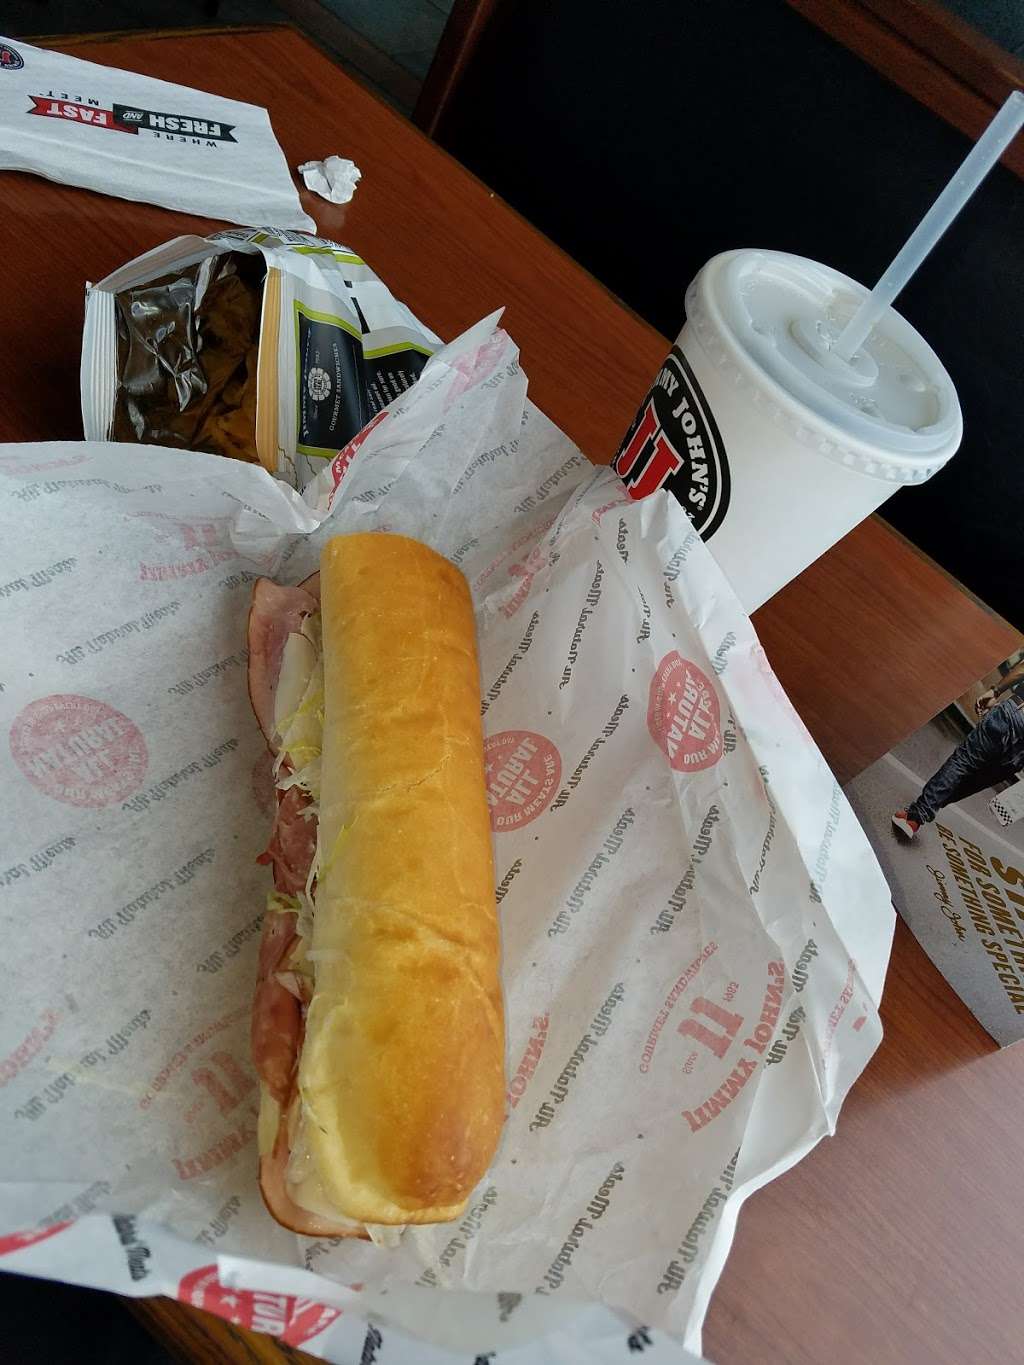 Jimmy Johns | 524 Indian Boundary Rd, Chesterton, IN 46304 | Phone: (219) 926-1629